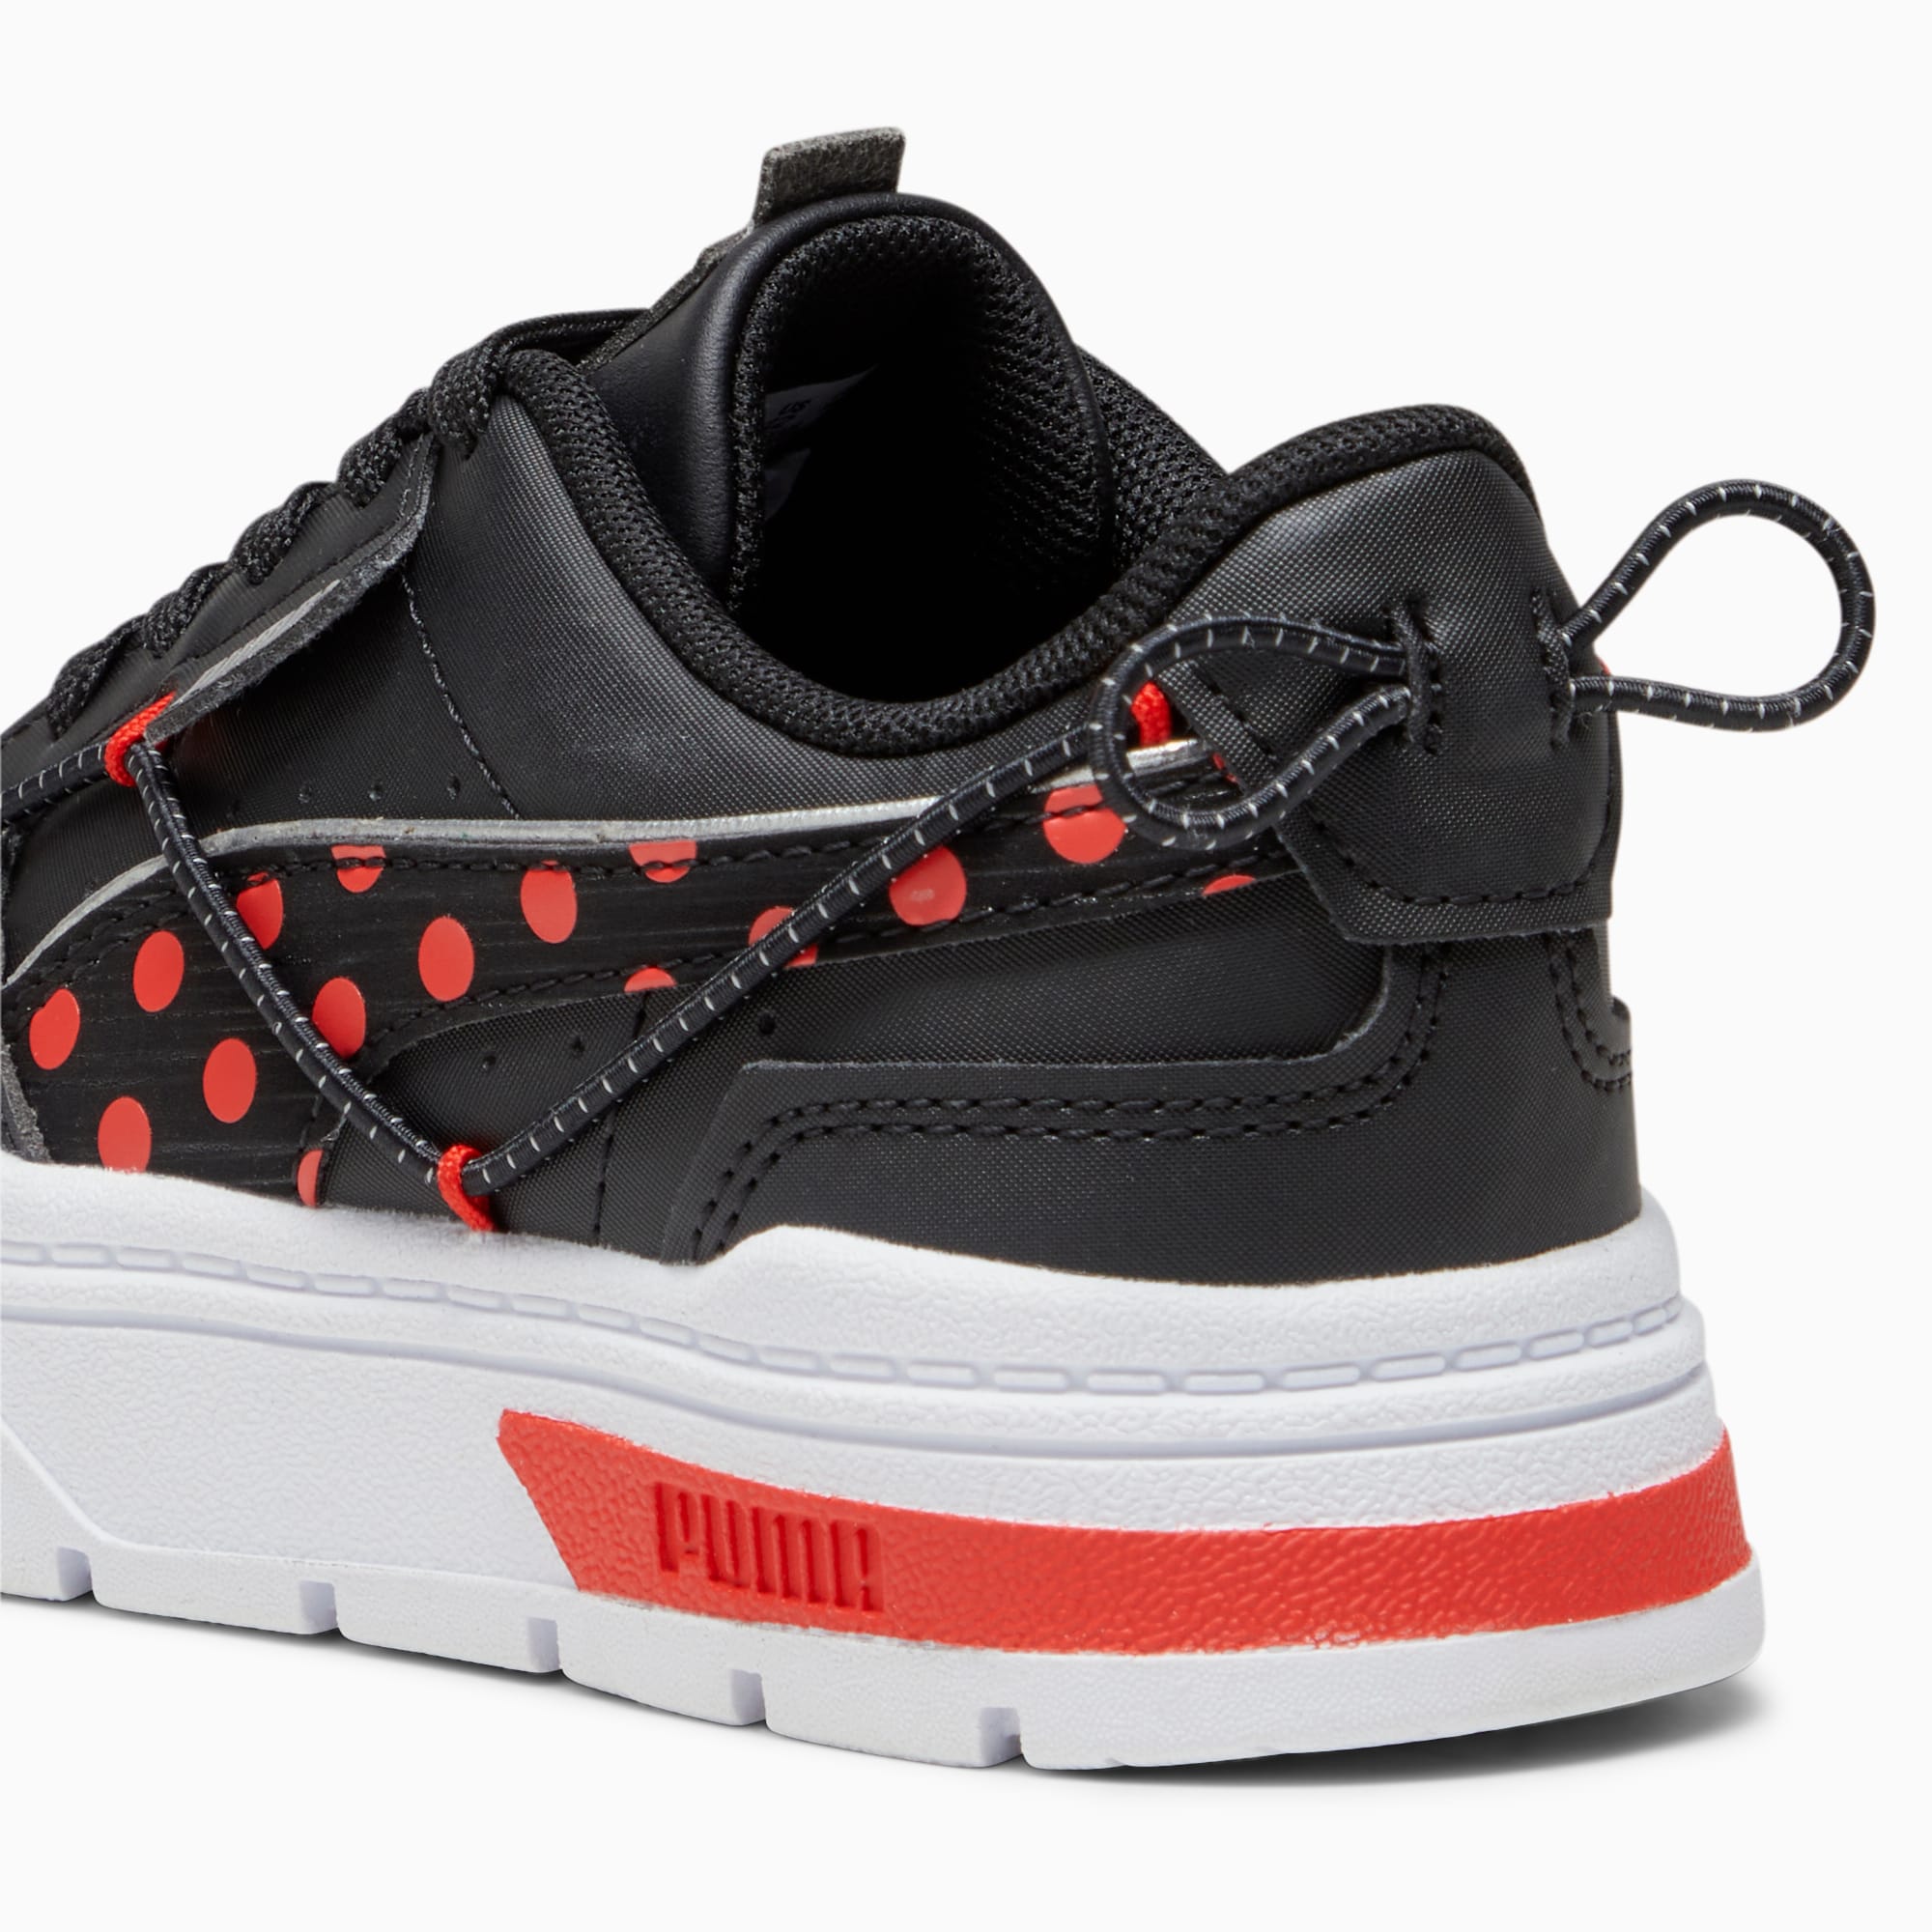 PUMA X Miraculous Mayze Stack Kids' Sneakers, Black/Red